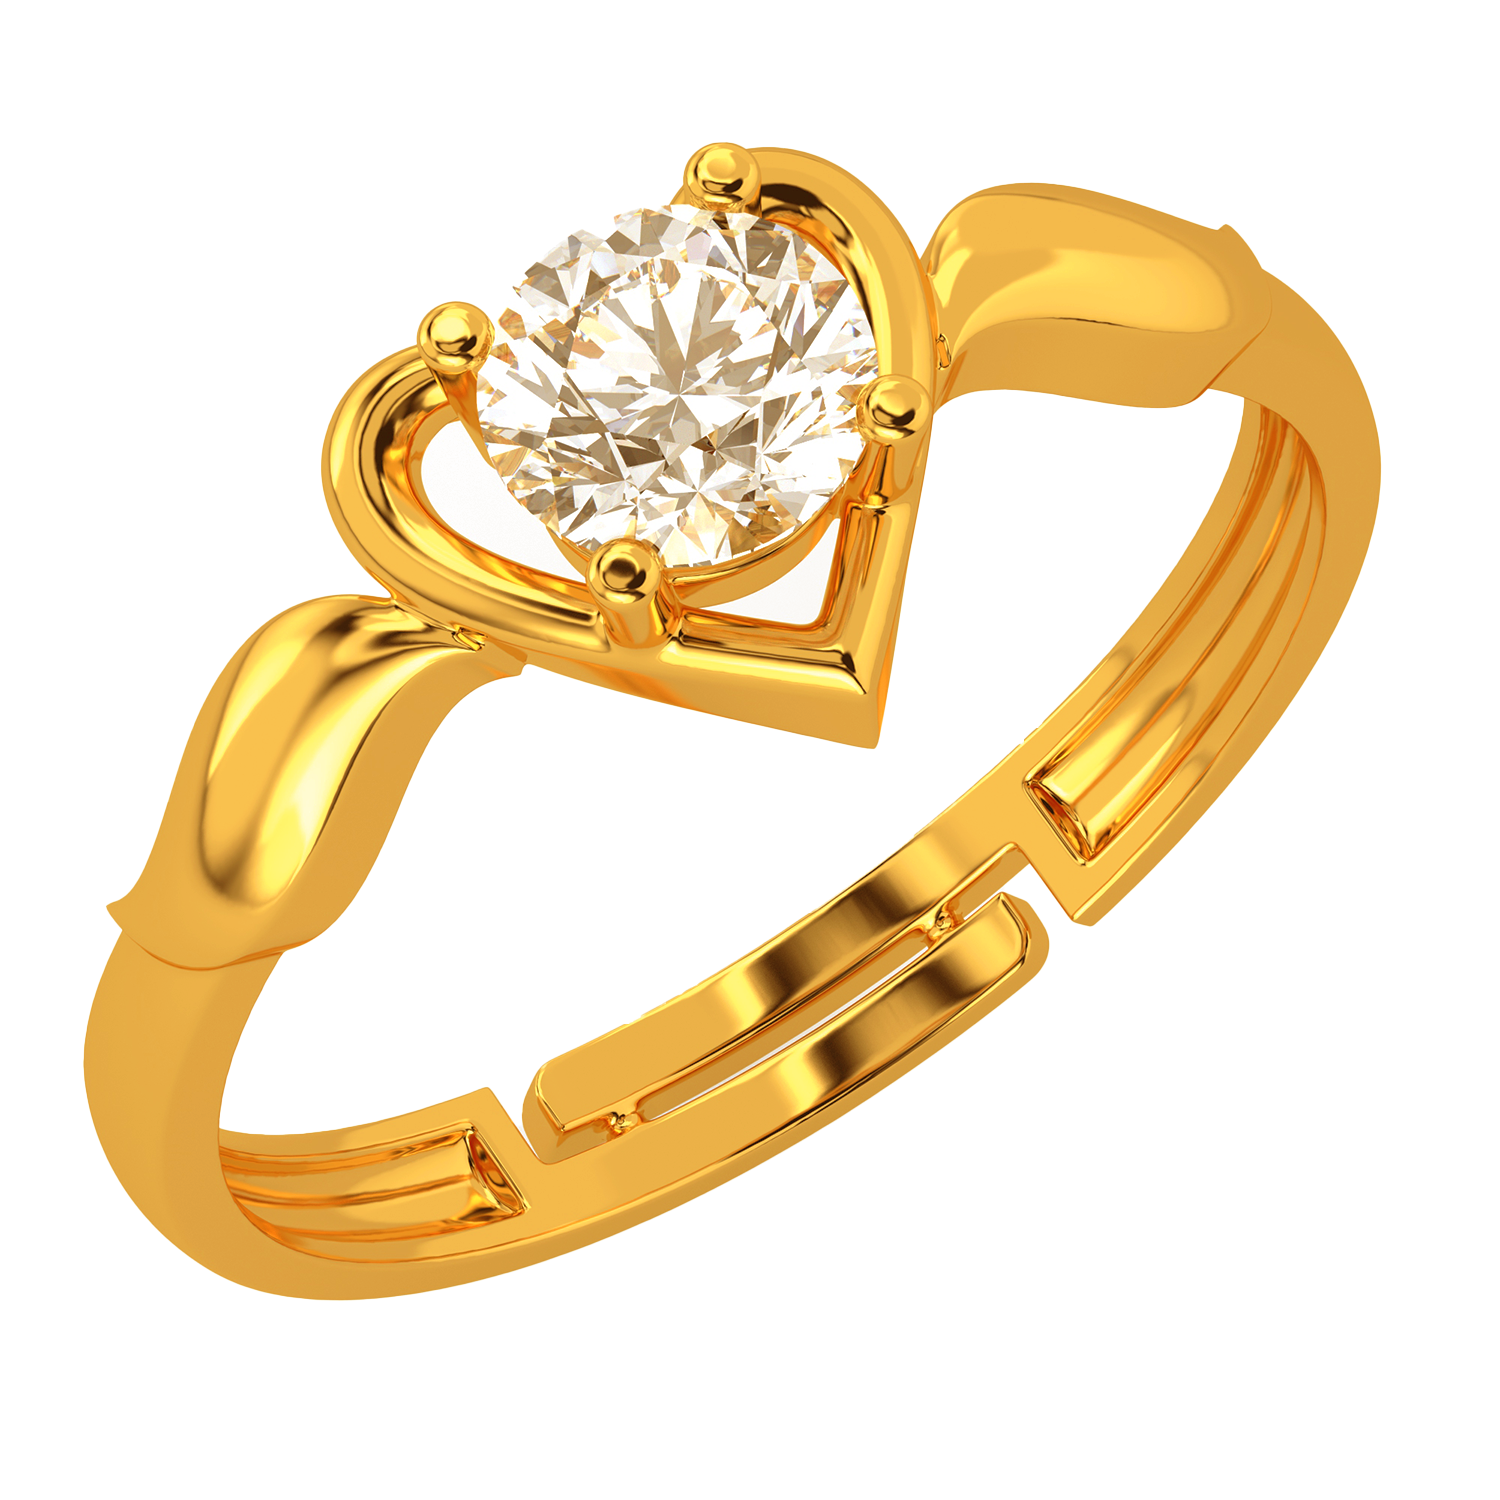 Buy Yellow Gold Rings for Women by Dishis Online | Ajio.com